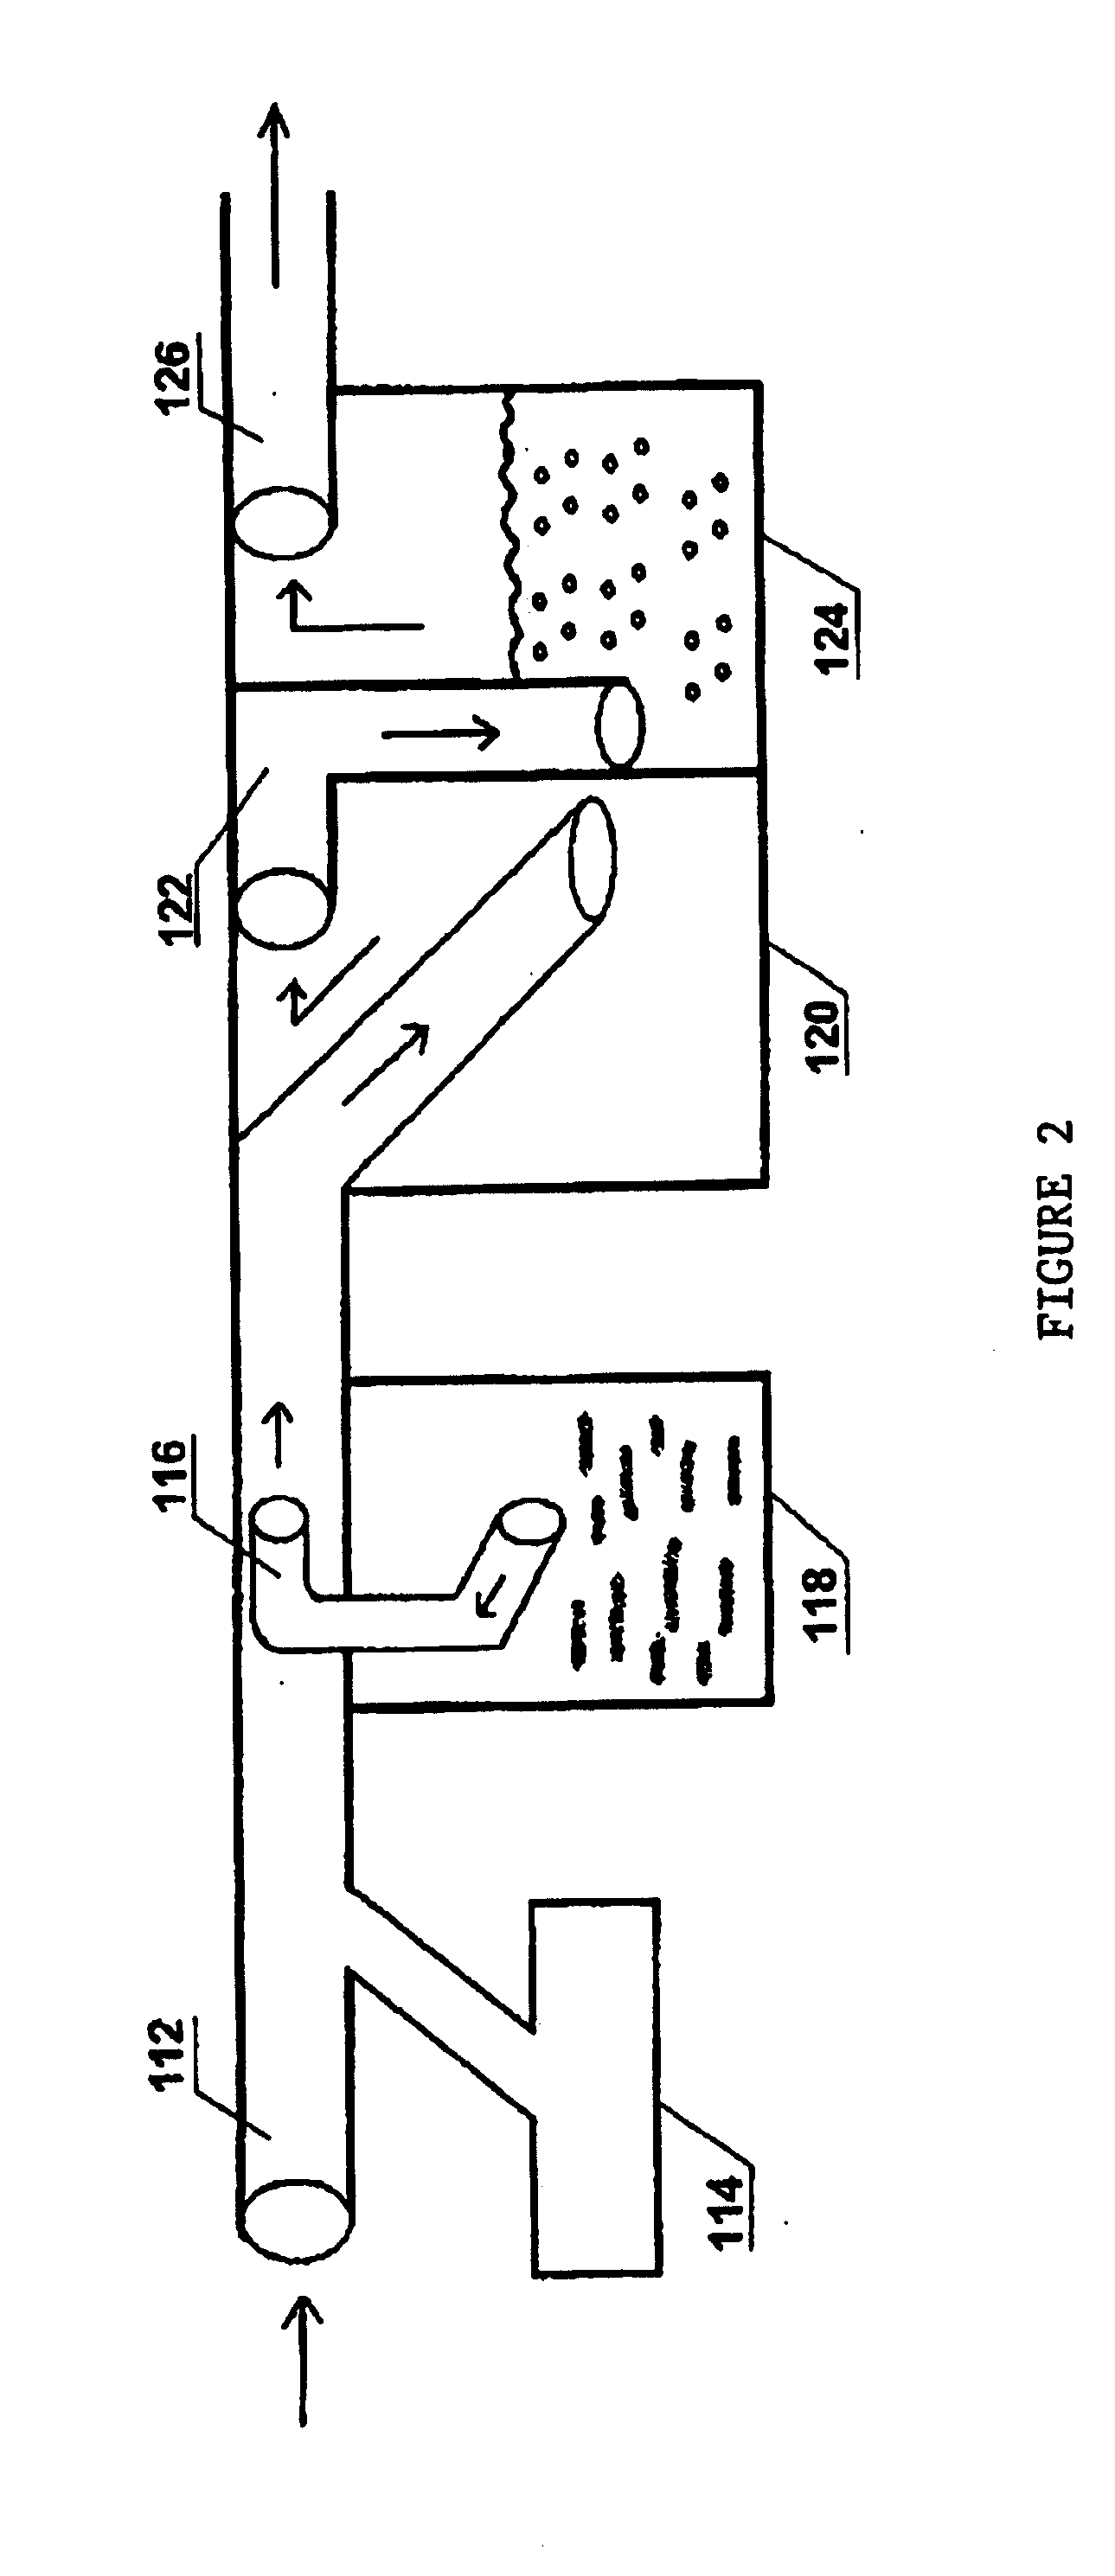 System for elimnating polluting gases produced from combustion processes